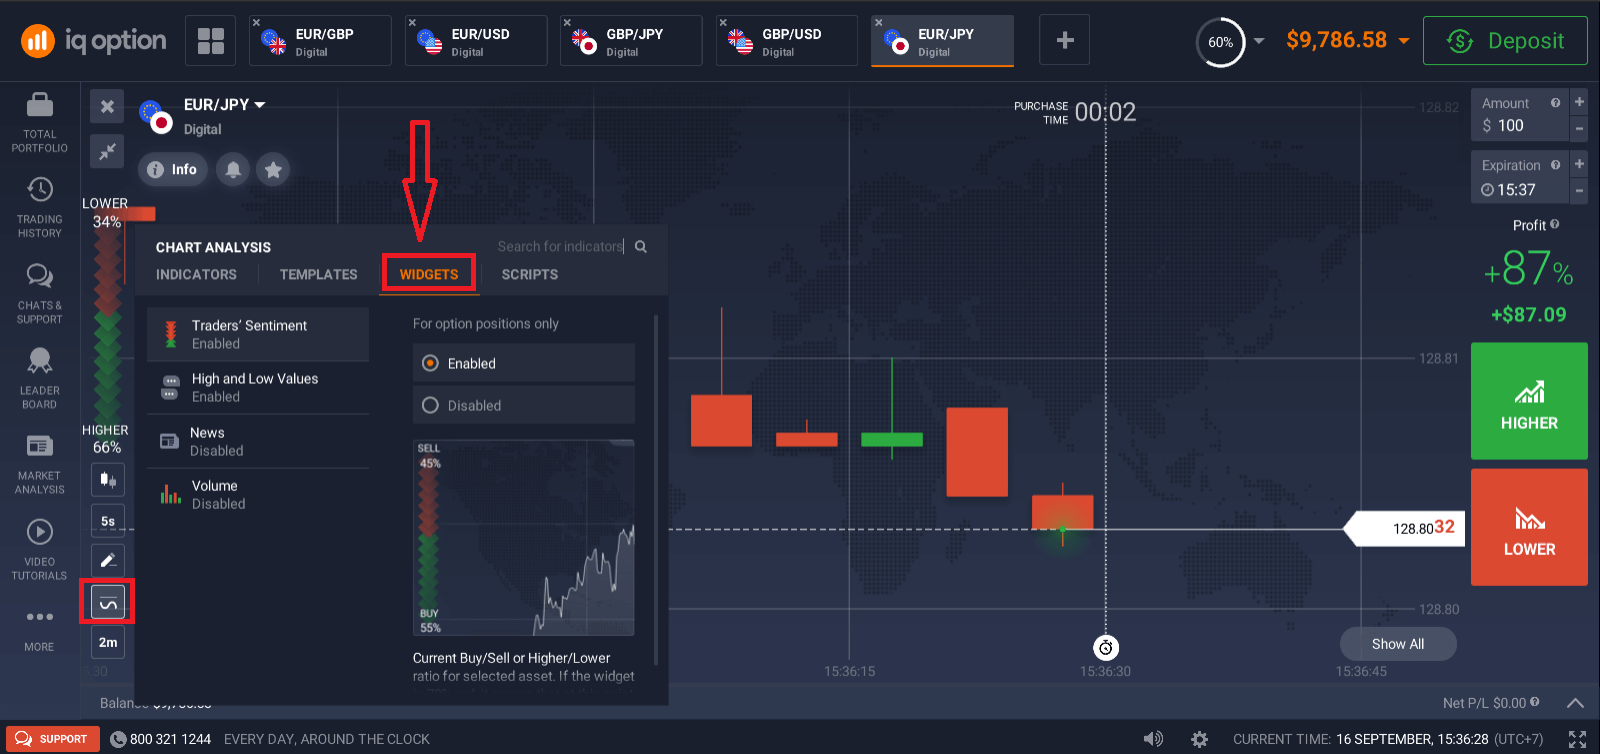 How to Trade Binary Options in IQ Option